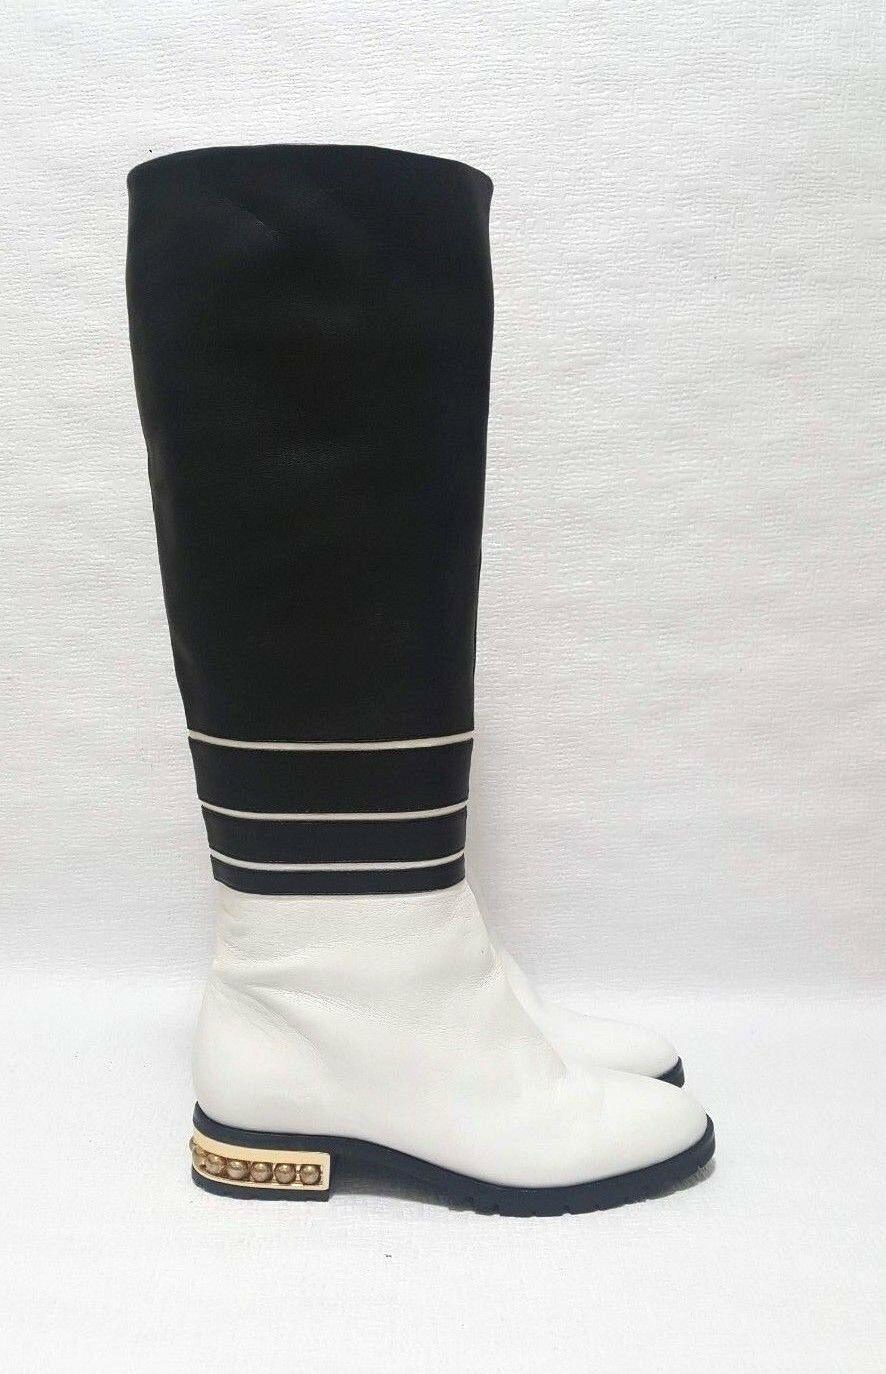 RARE UNIQUE KARL LAGERFELD Black White Lambskin Leather Beaded-Heel Boots SAMPLE Size 6 - SVNYFancy